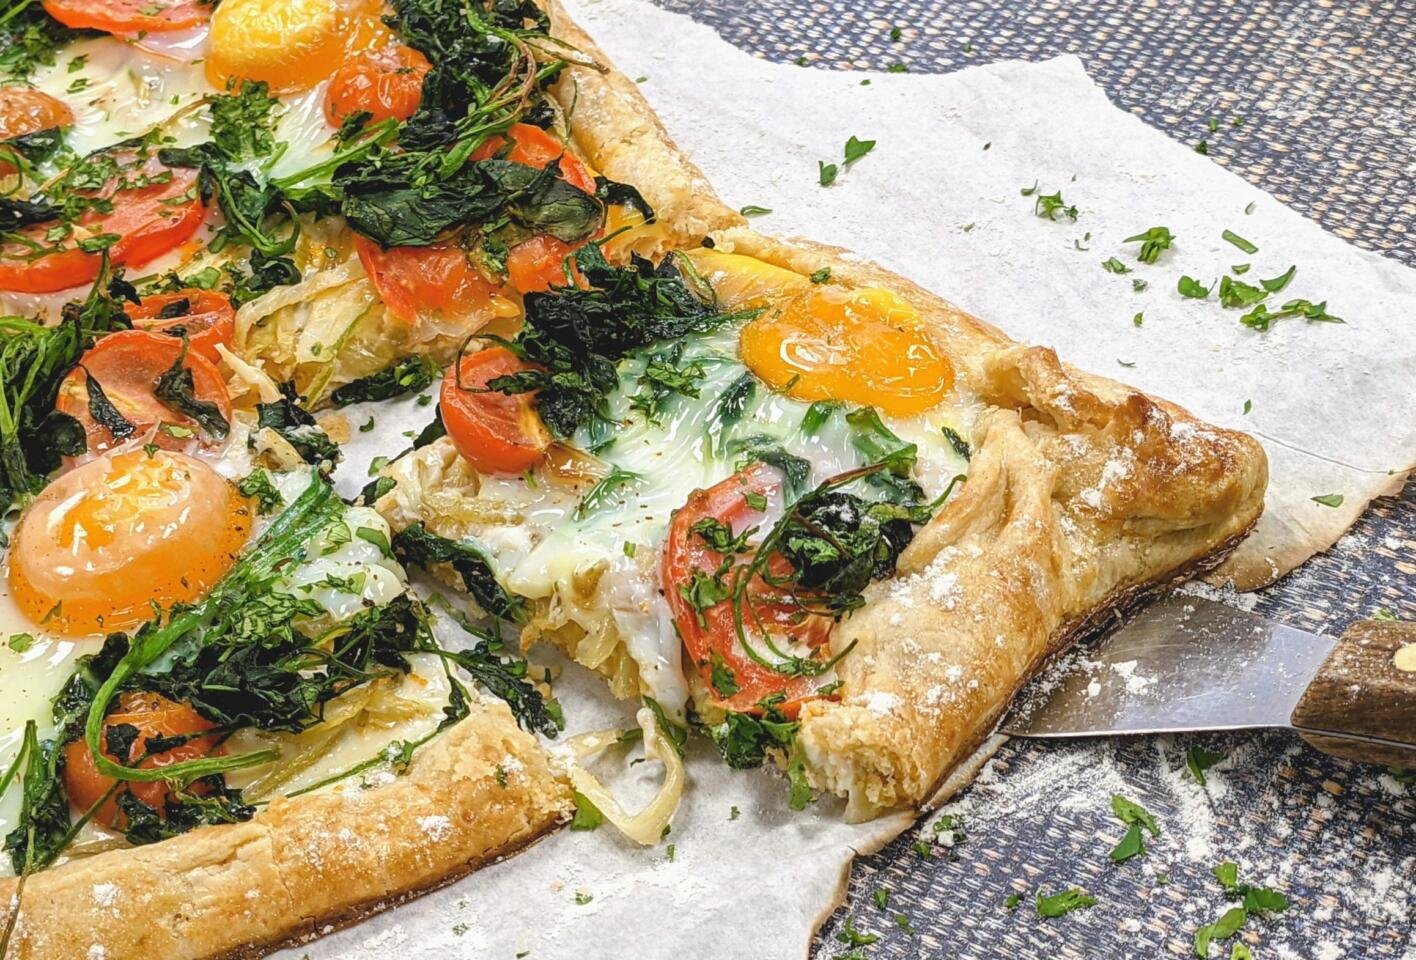 Baked Egg, Fennel and Watercress Galette